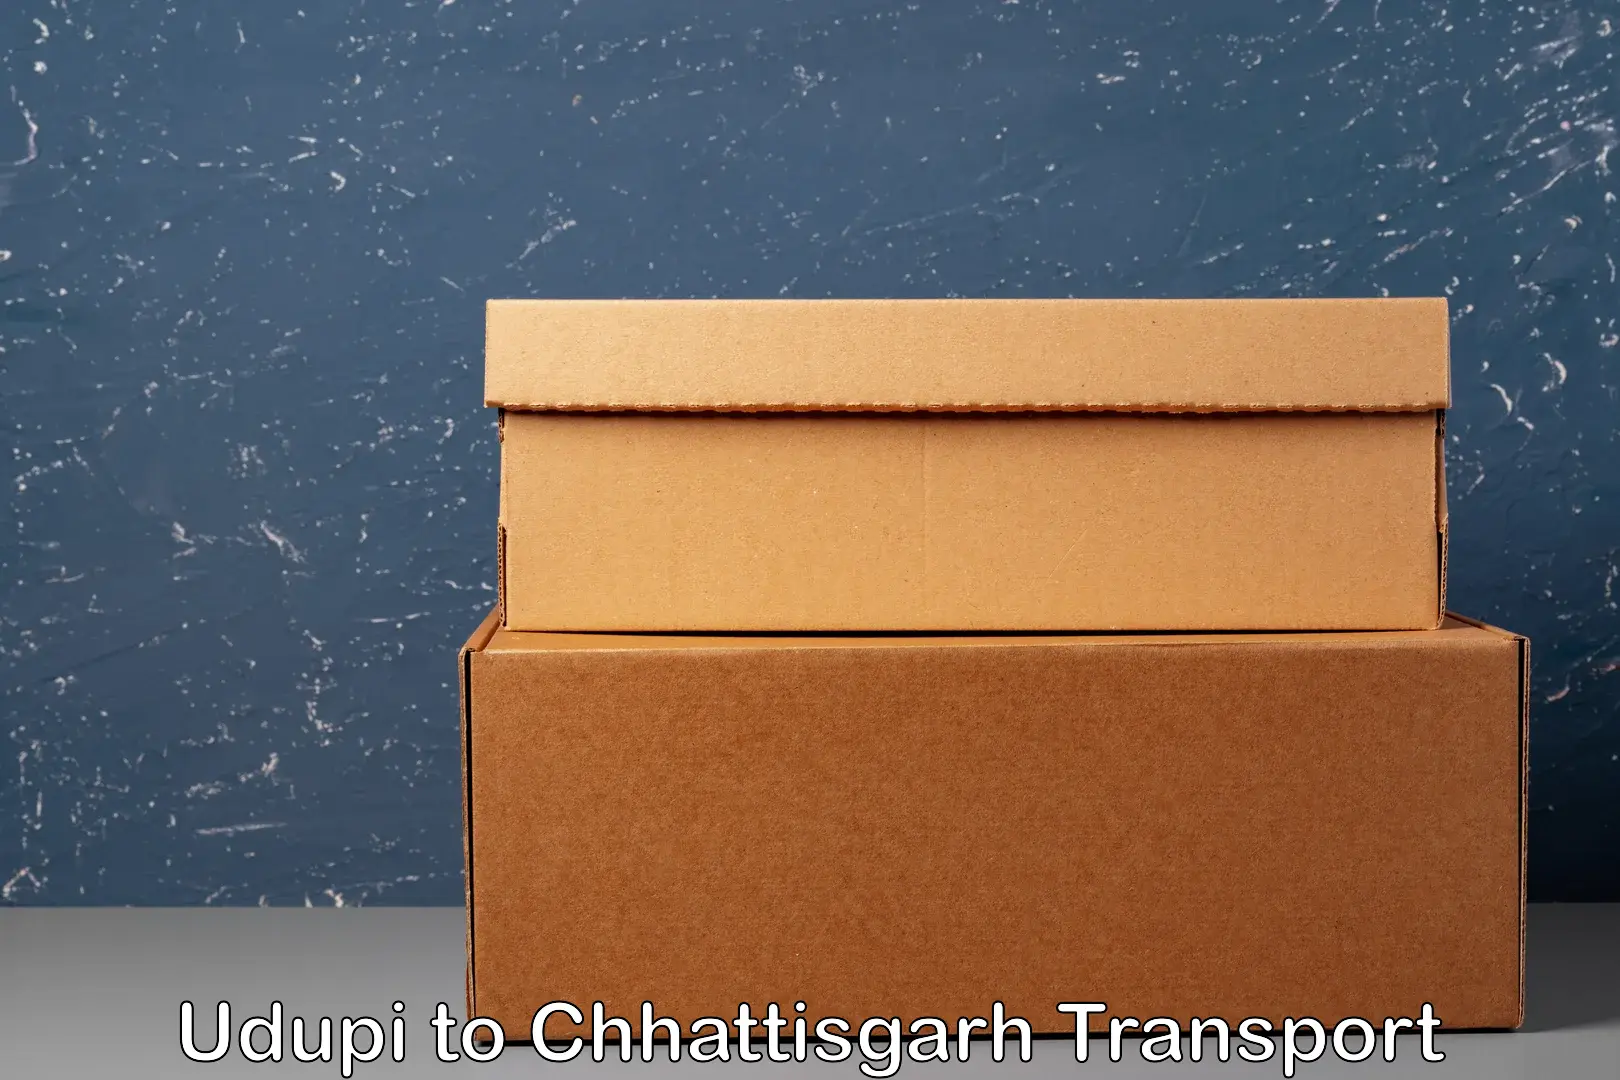 Express transport services in Udupi to Surguja